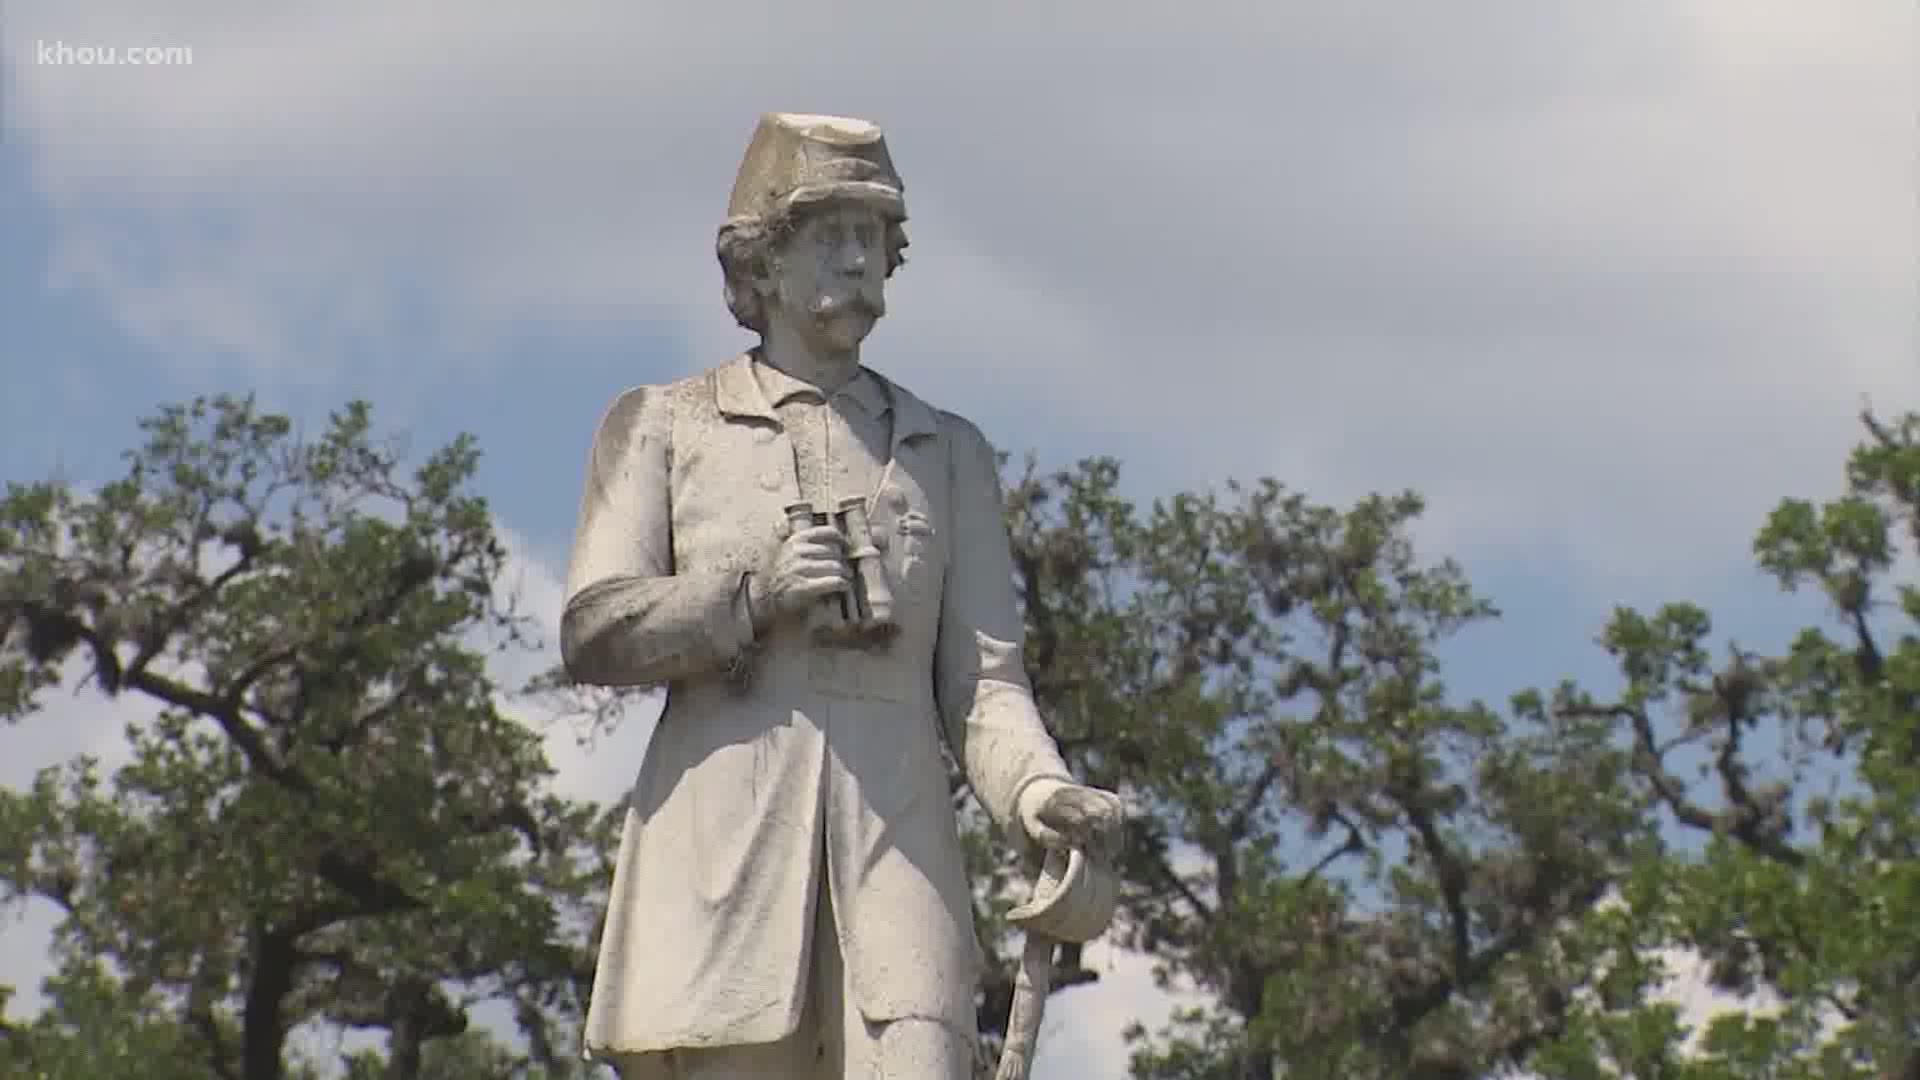 The statue of the Confederate soldier was one of two removed from city parks this week.